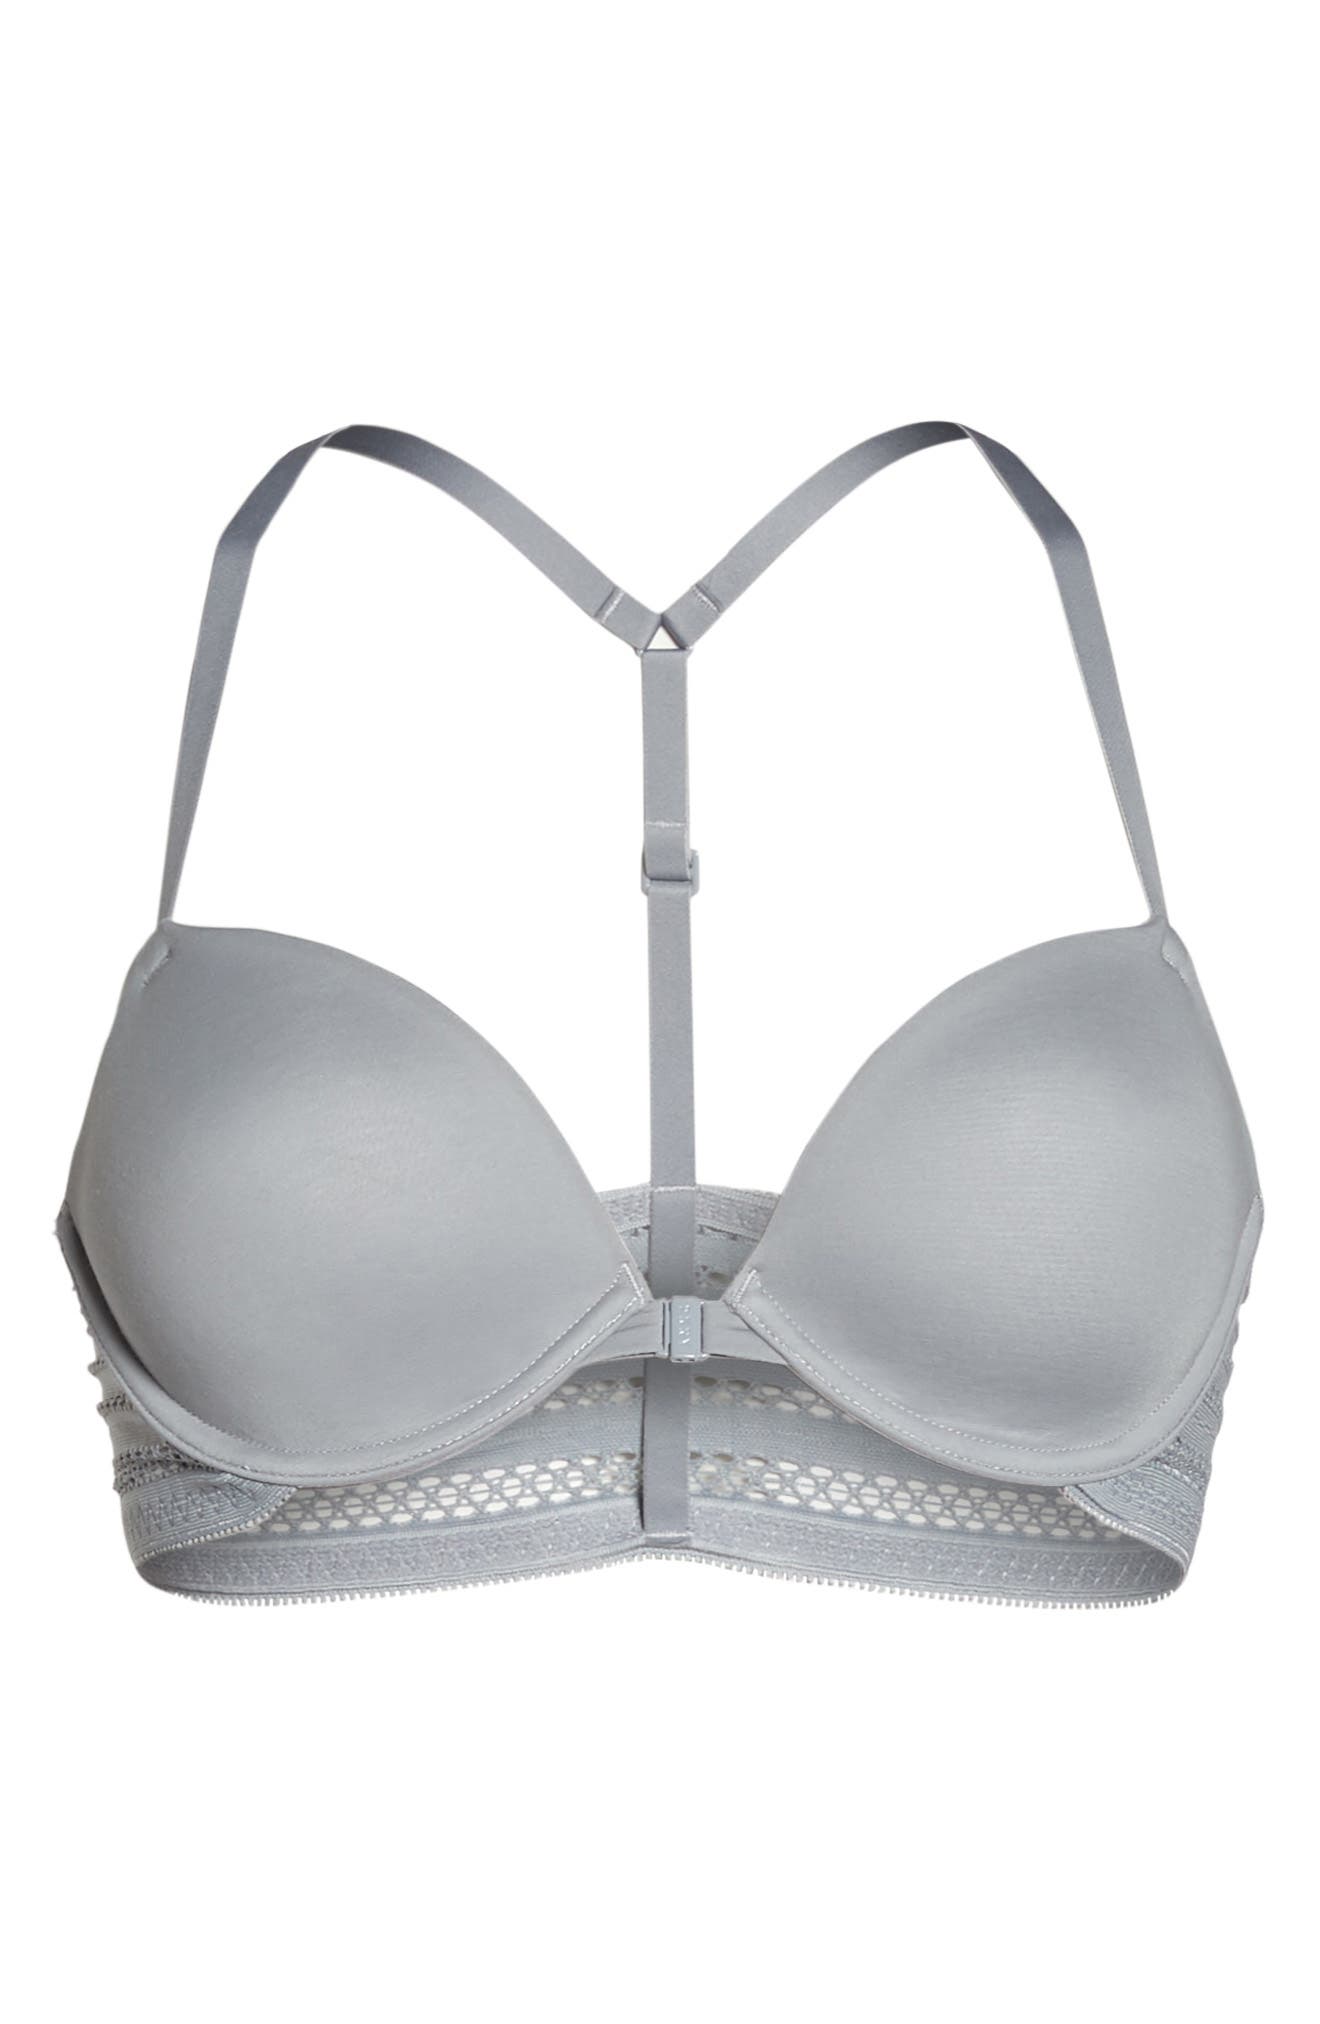 DKNY | Lace Panel Snap Front Underwire Bra | Nordstrom Rack